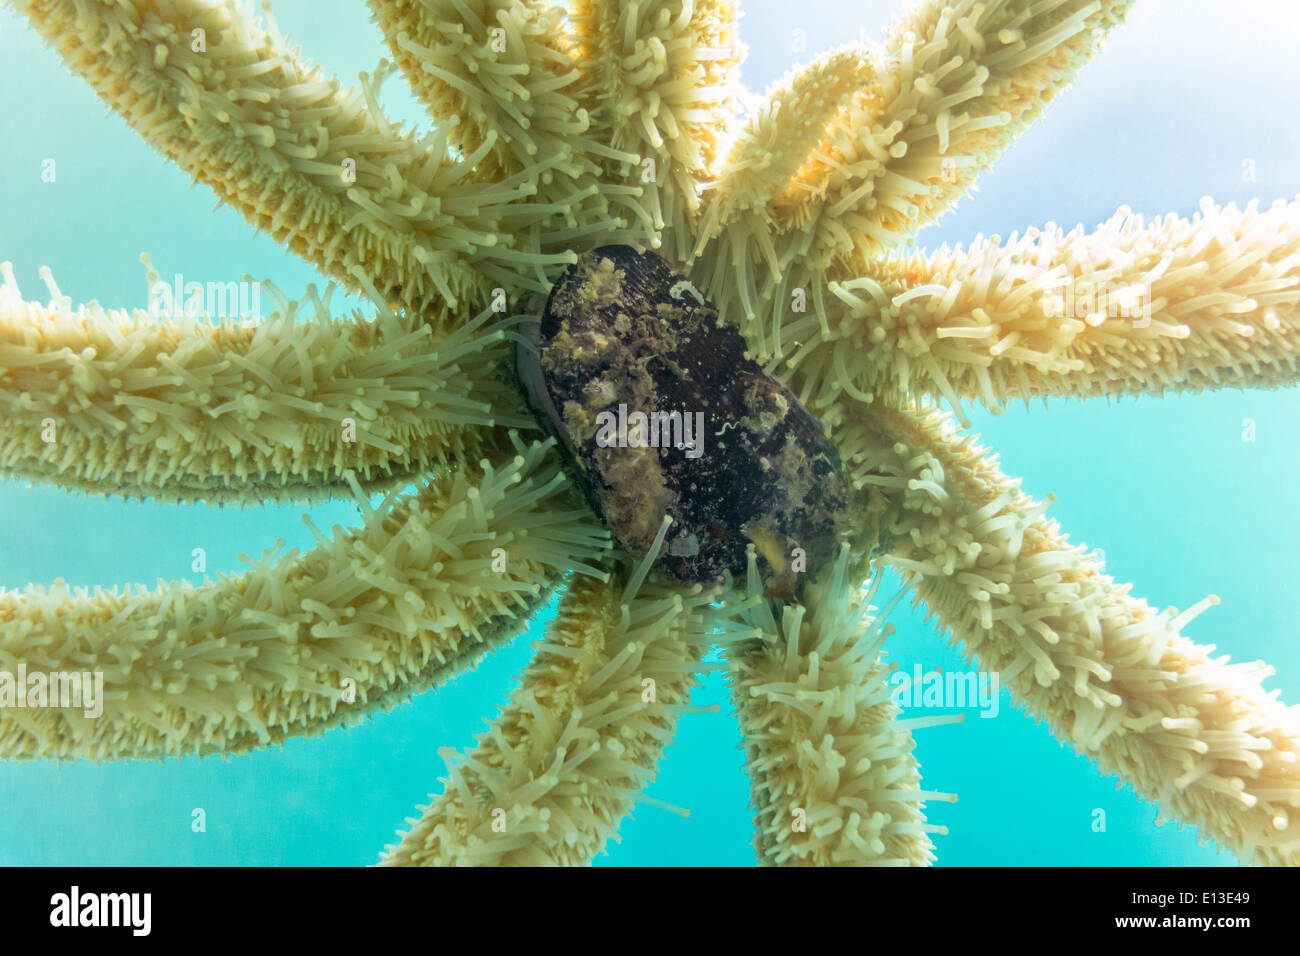 Eleven Armed Starfish Sea Star Coscinasterias Calamaria eating a mussel. Fissiparity: it is re-growing one arm after an accident Stock Photo